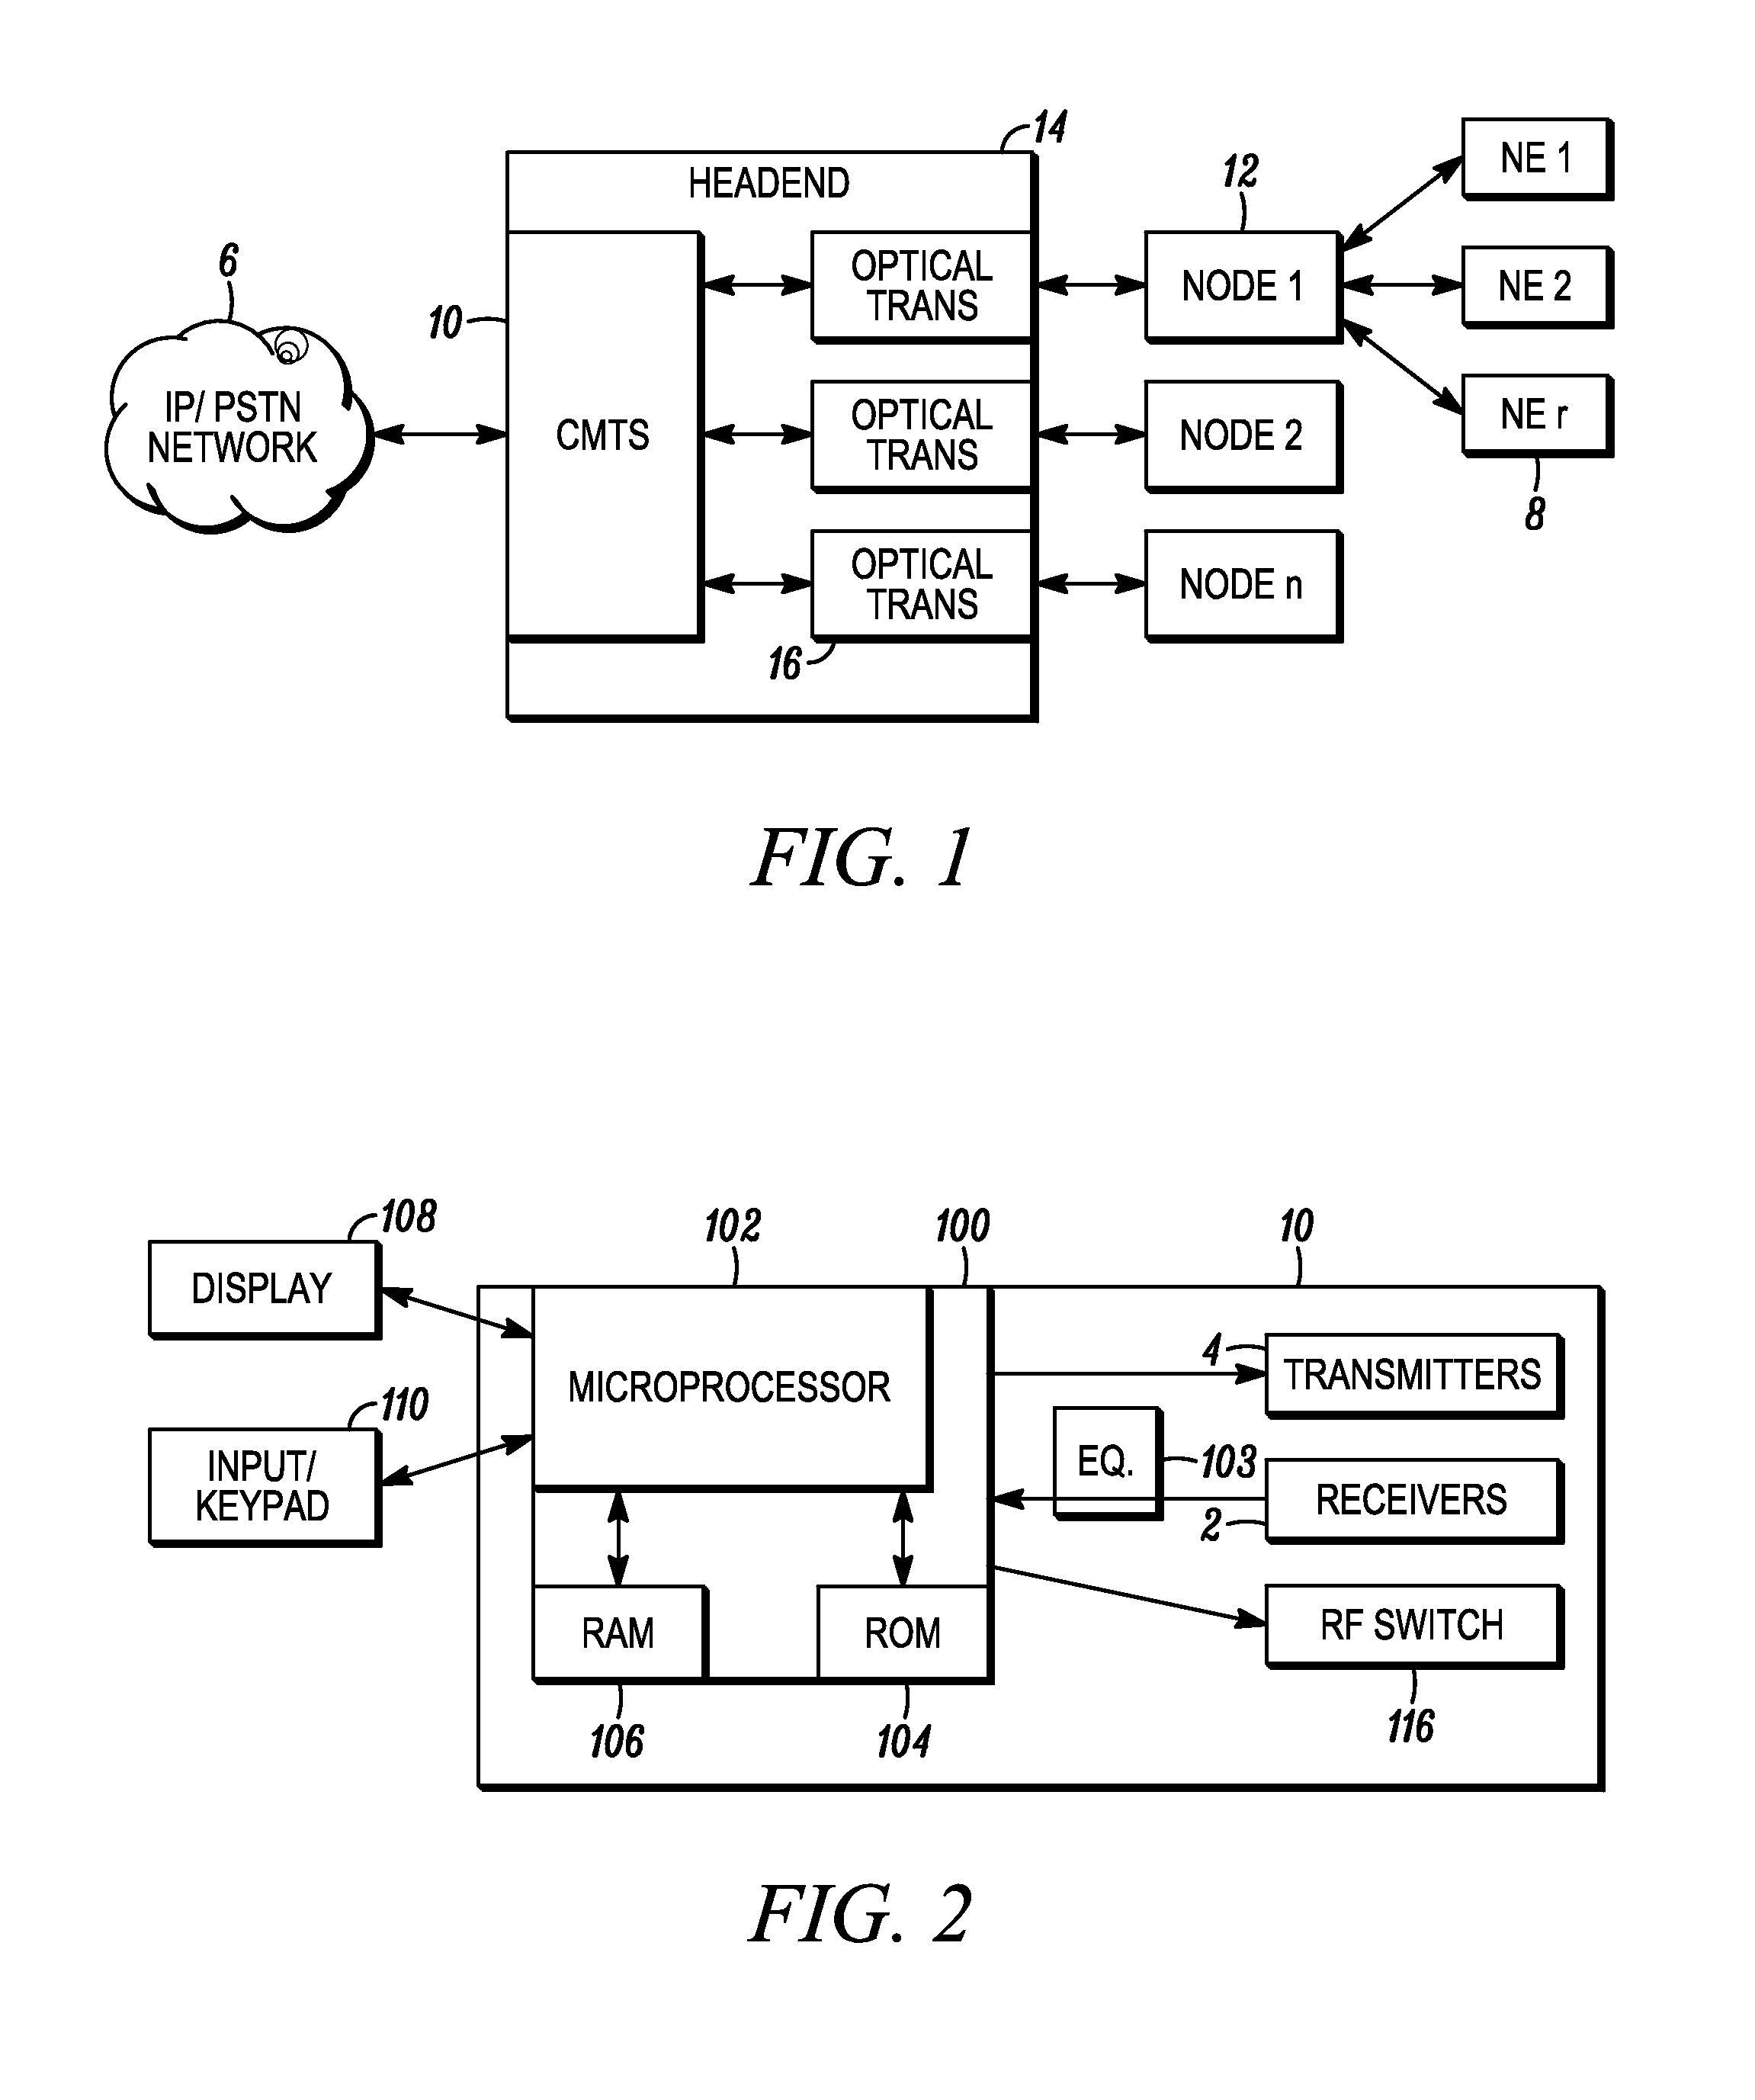 Method and apparatus for improving throughput of a modem